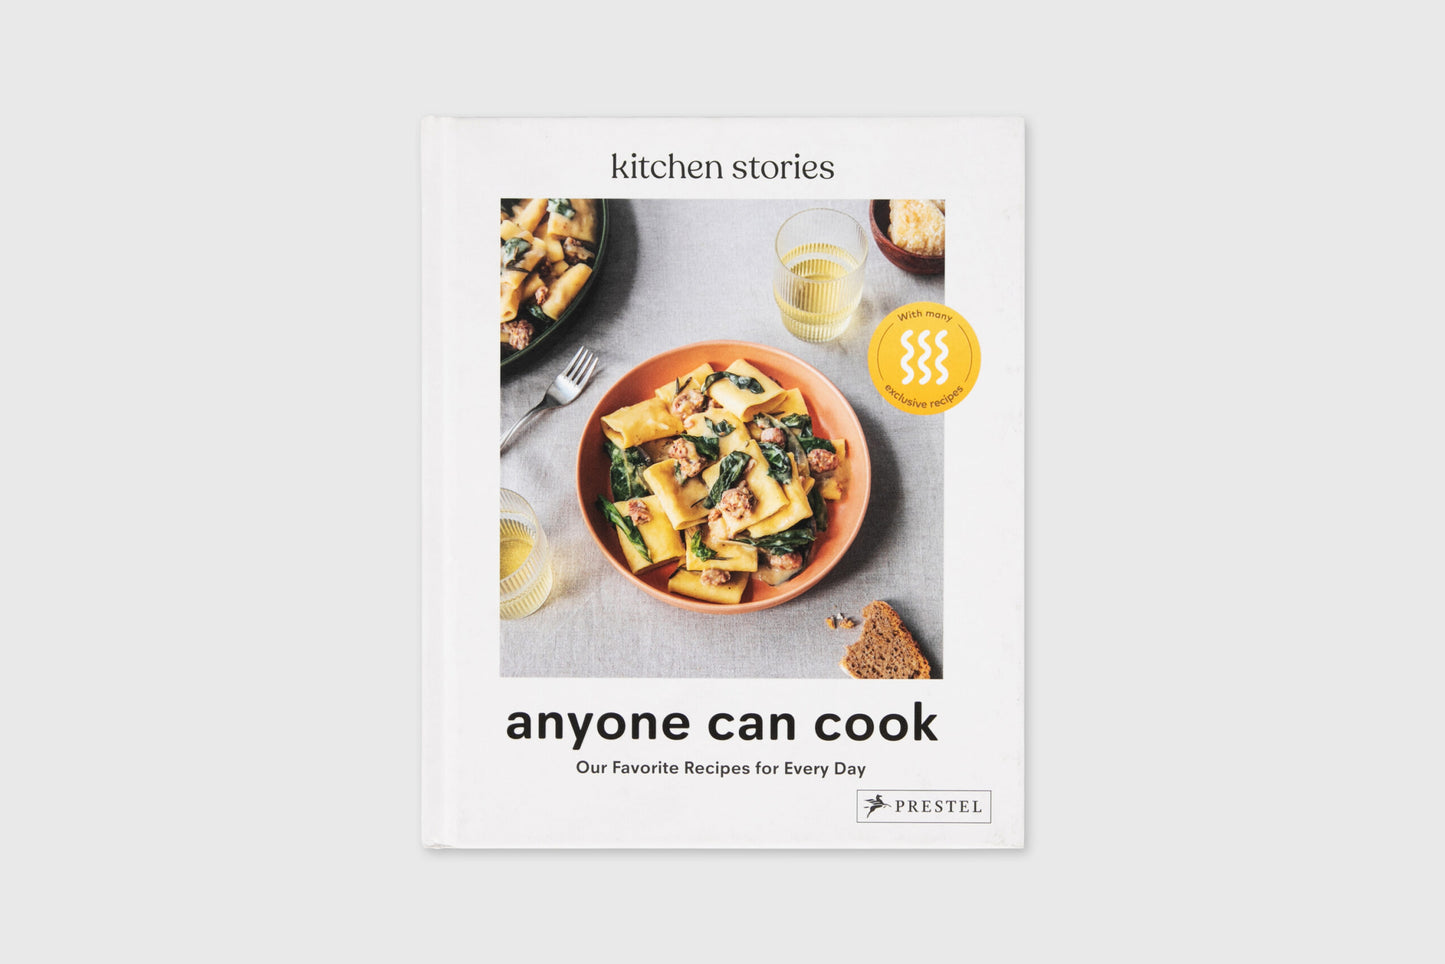 Anyone Can Cook: Our Favorite Recipes for Every Day